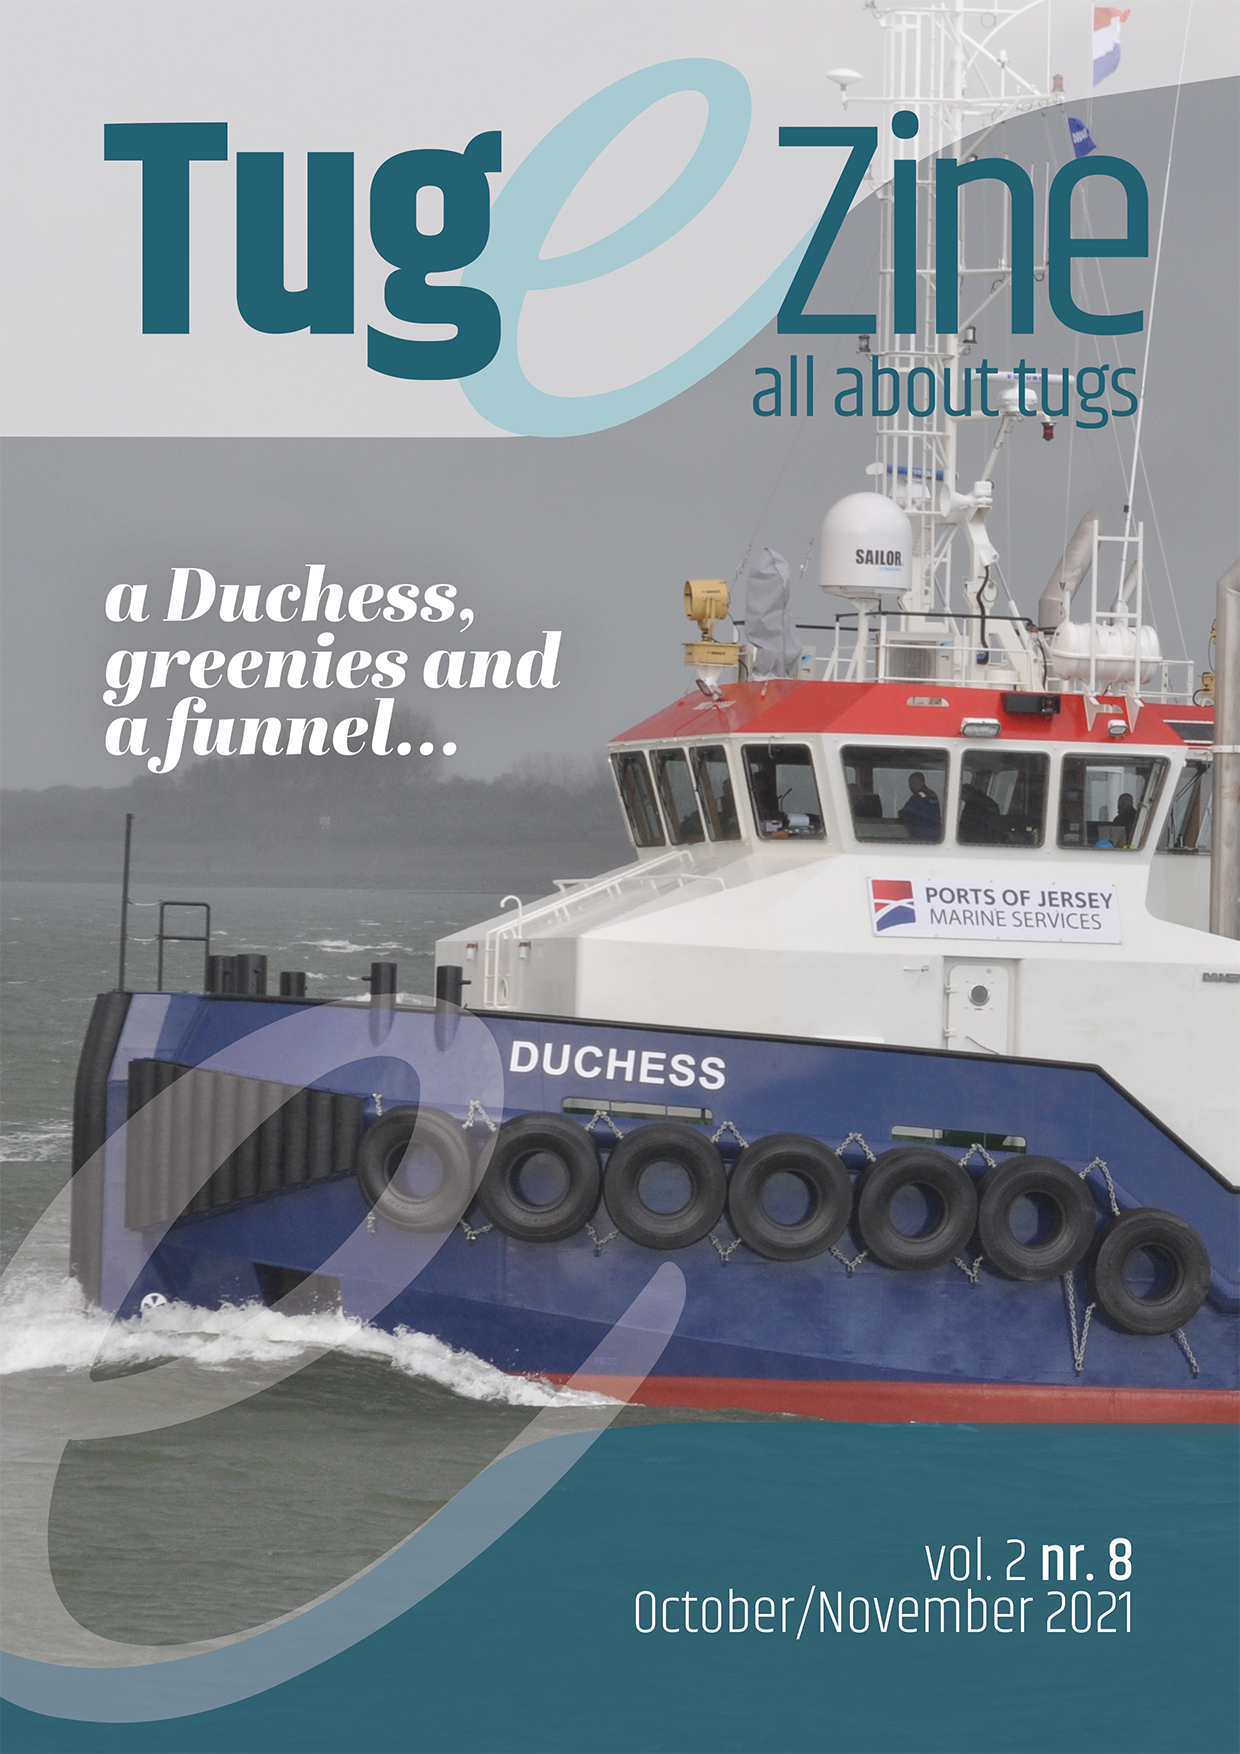 all about tugs